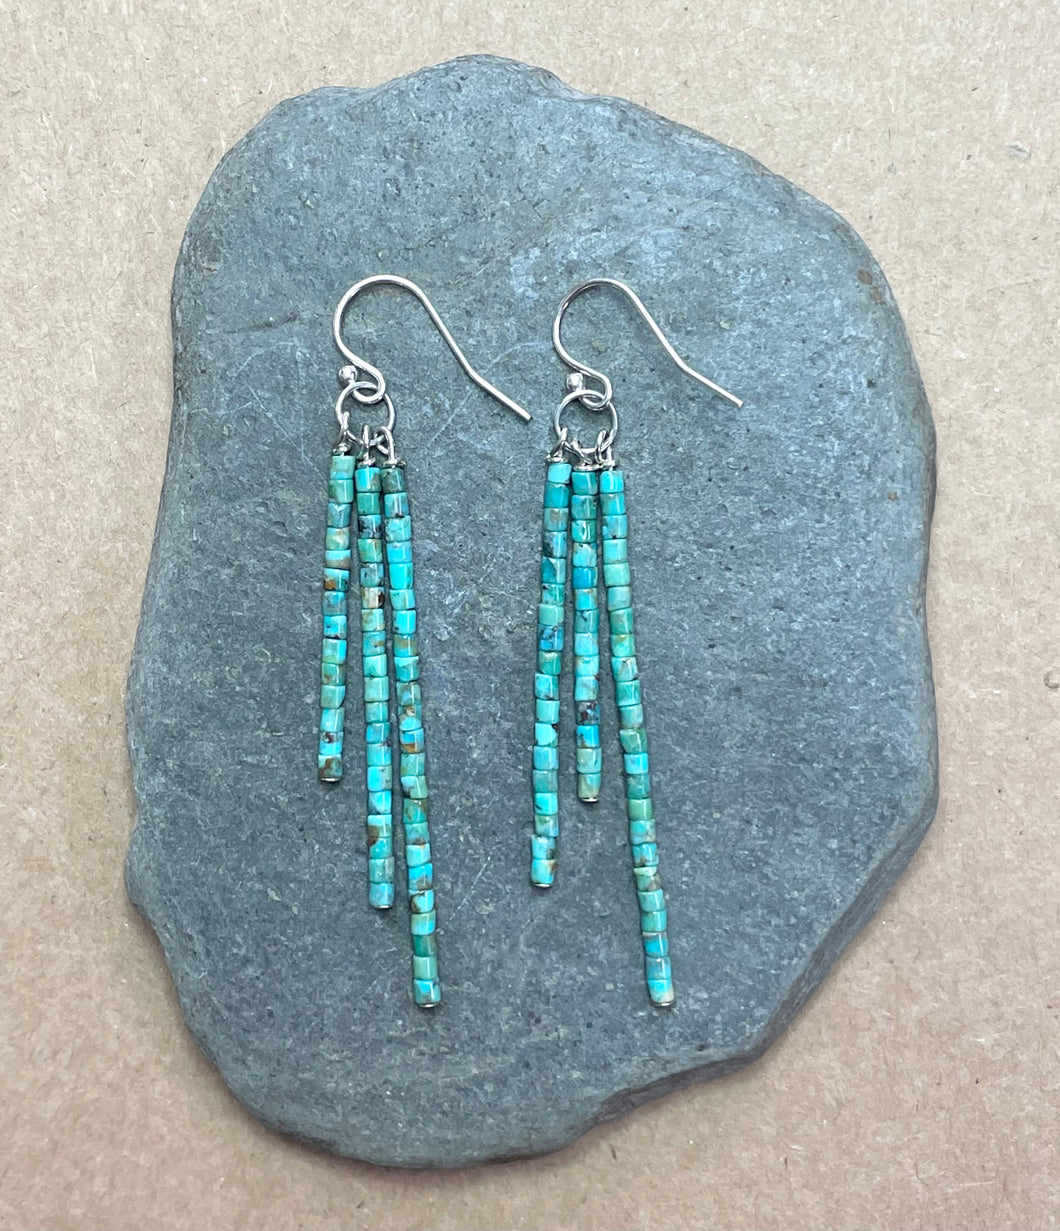 “Day and night turquoise earrings”